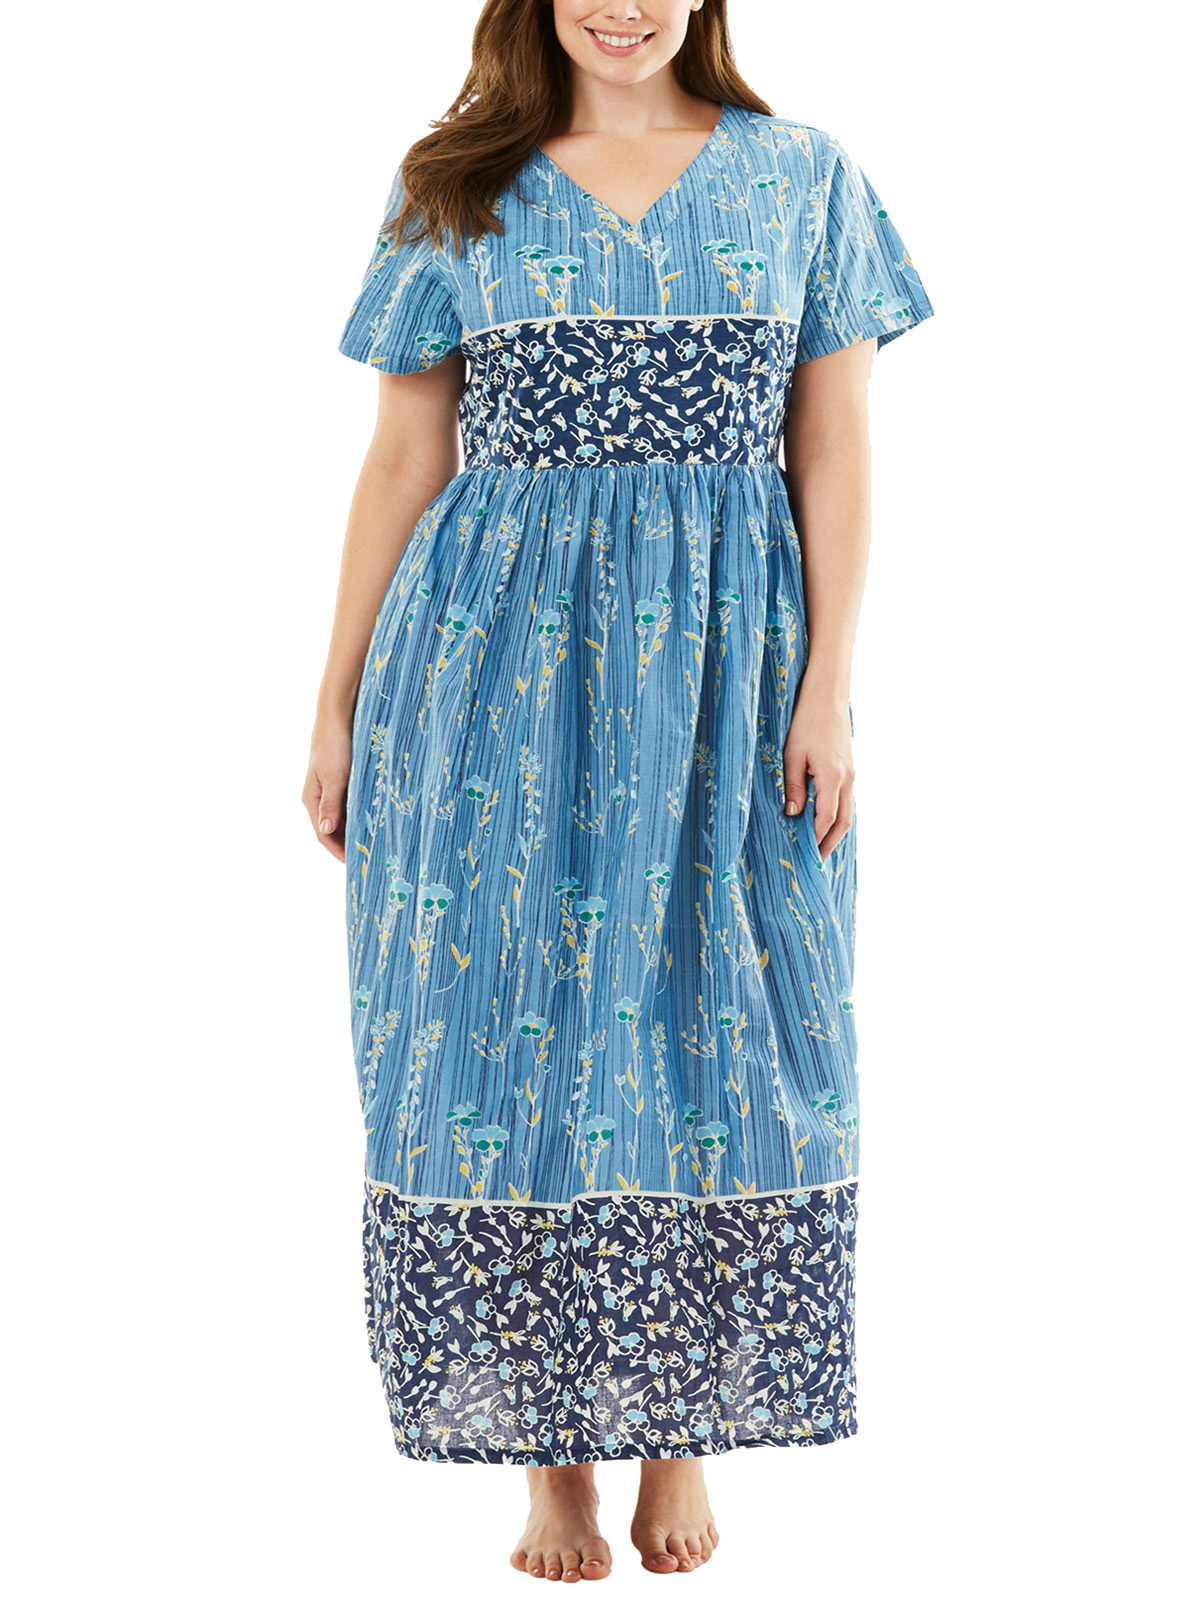 Only Necessities - - Only Necessities Blue Floral Crinkle Cotton Dress ...